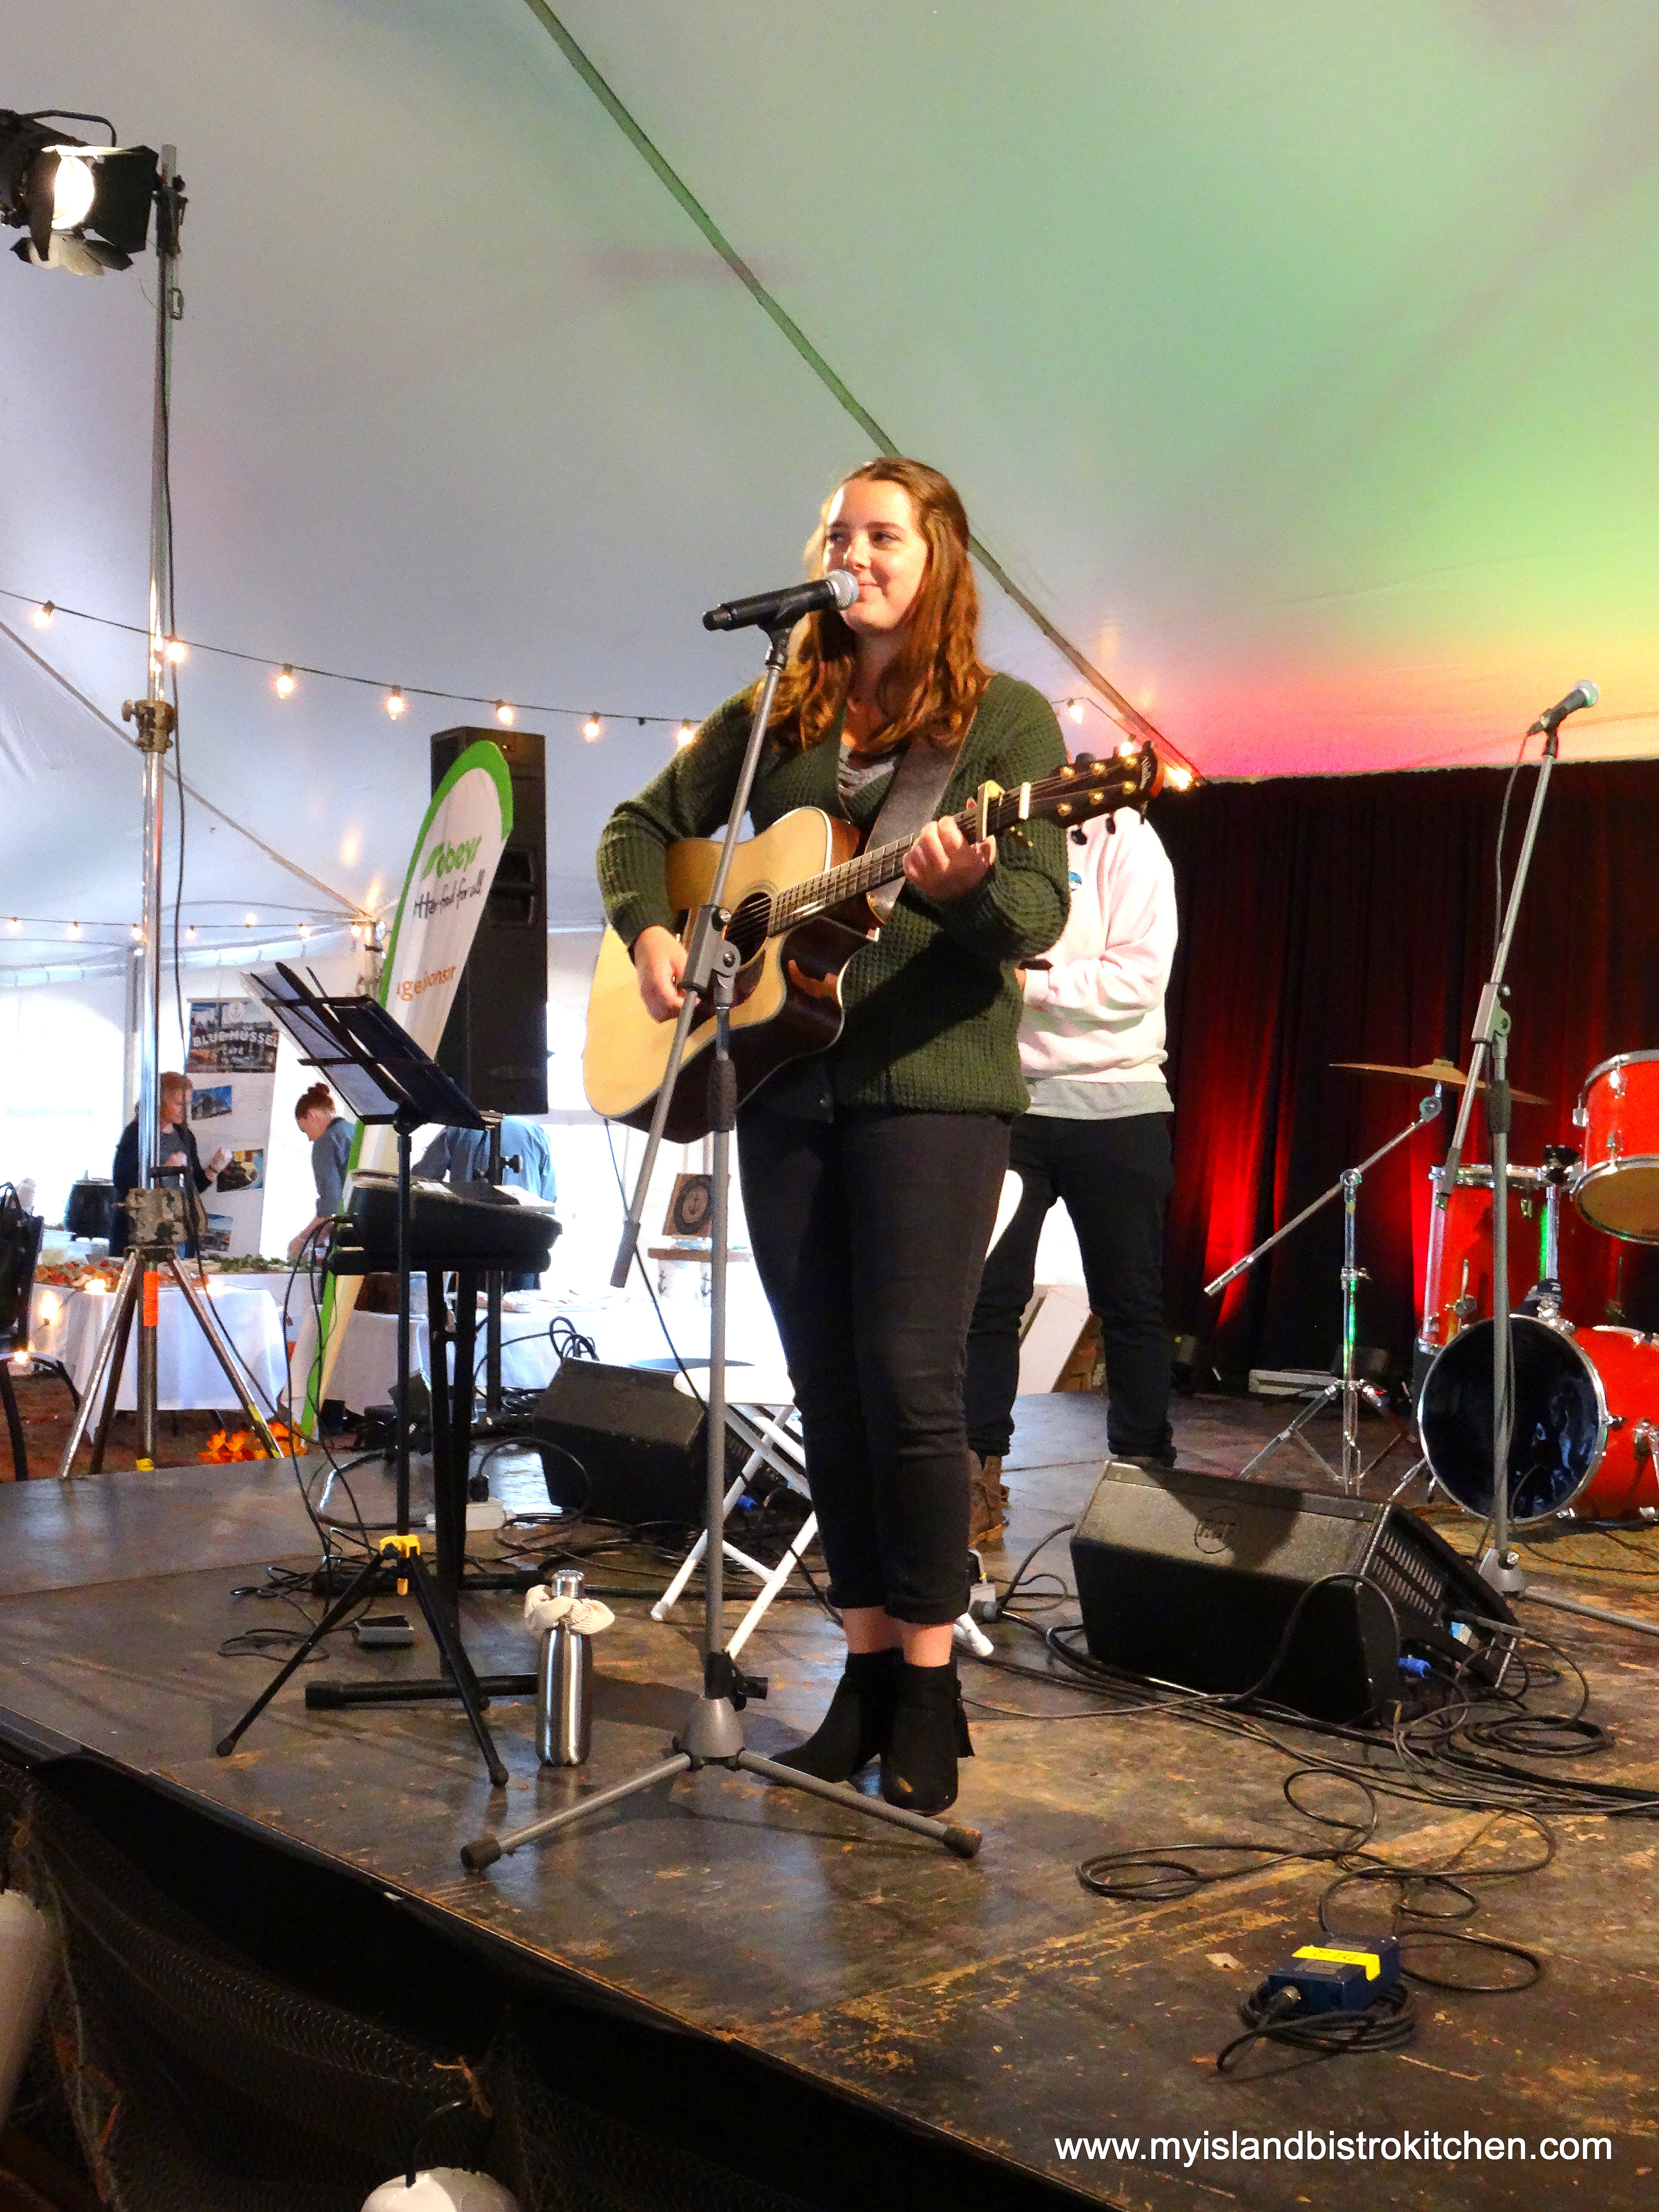 Olivia Blacquiere Performing at "Taste of North Rustico" PEI Fall Flavours 2017 Event